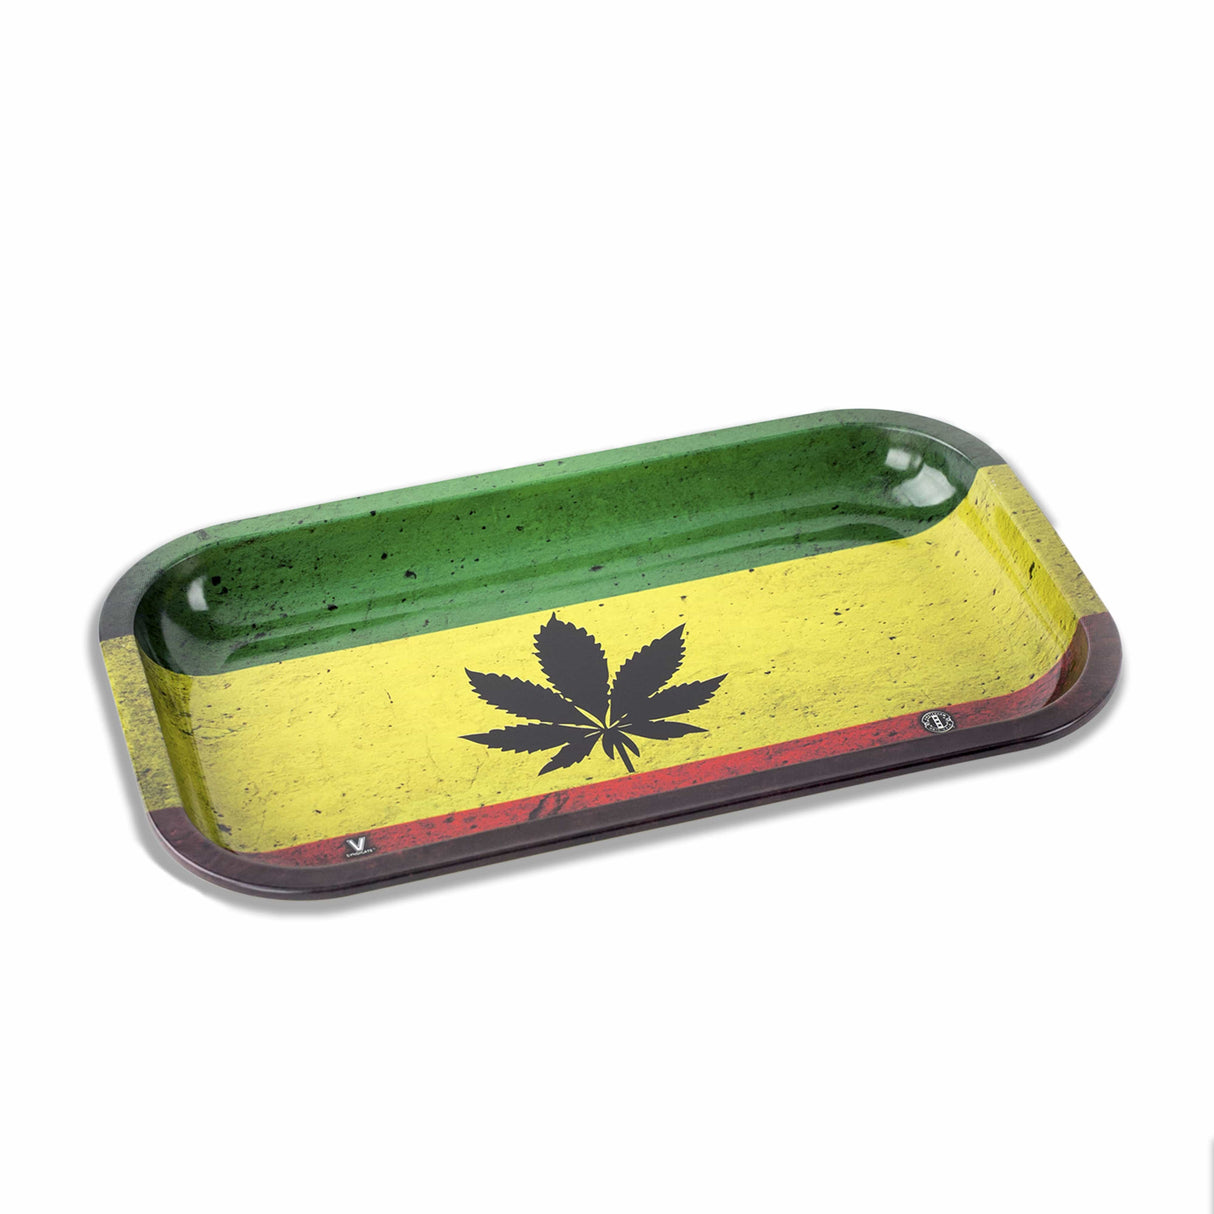 V Syndicate Rasta Leaf Metal Rolling Tray in vibrant red, yellow, and green with a centered leaf design.